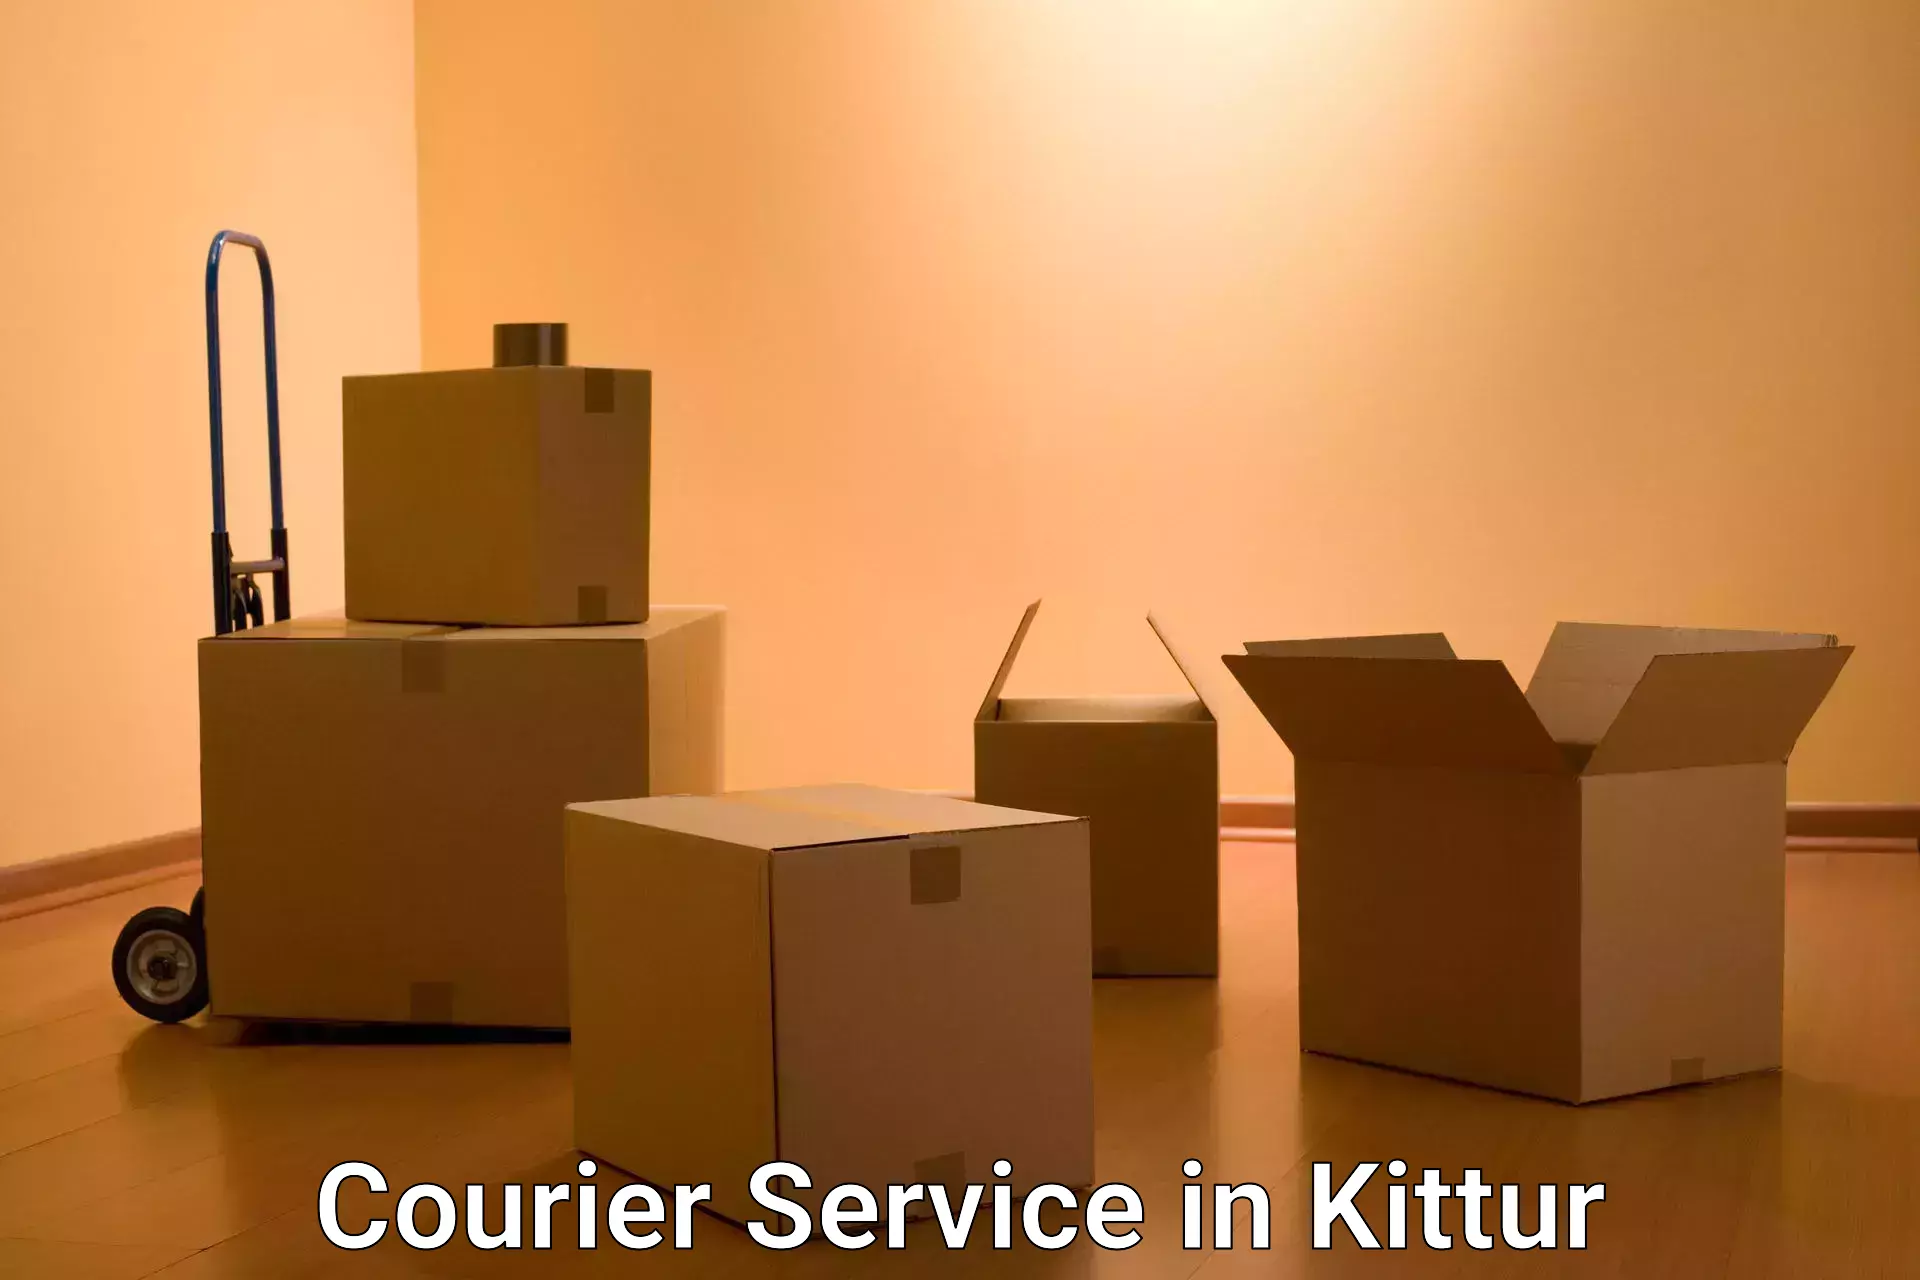 Small parcel delivery in Kittur